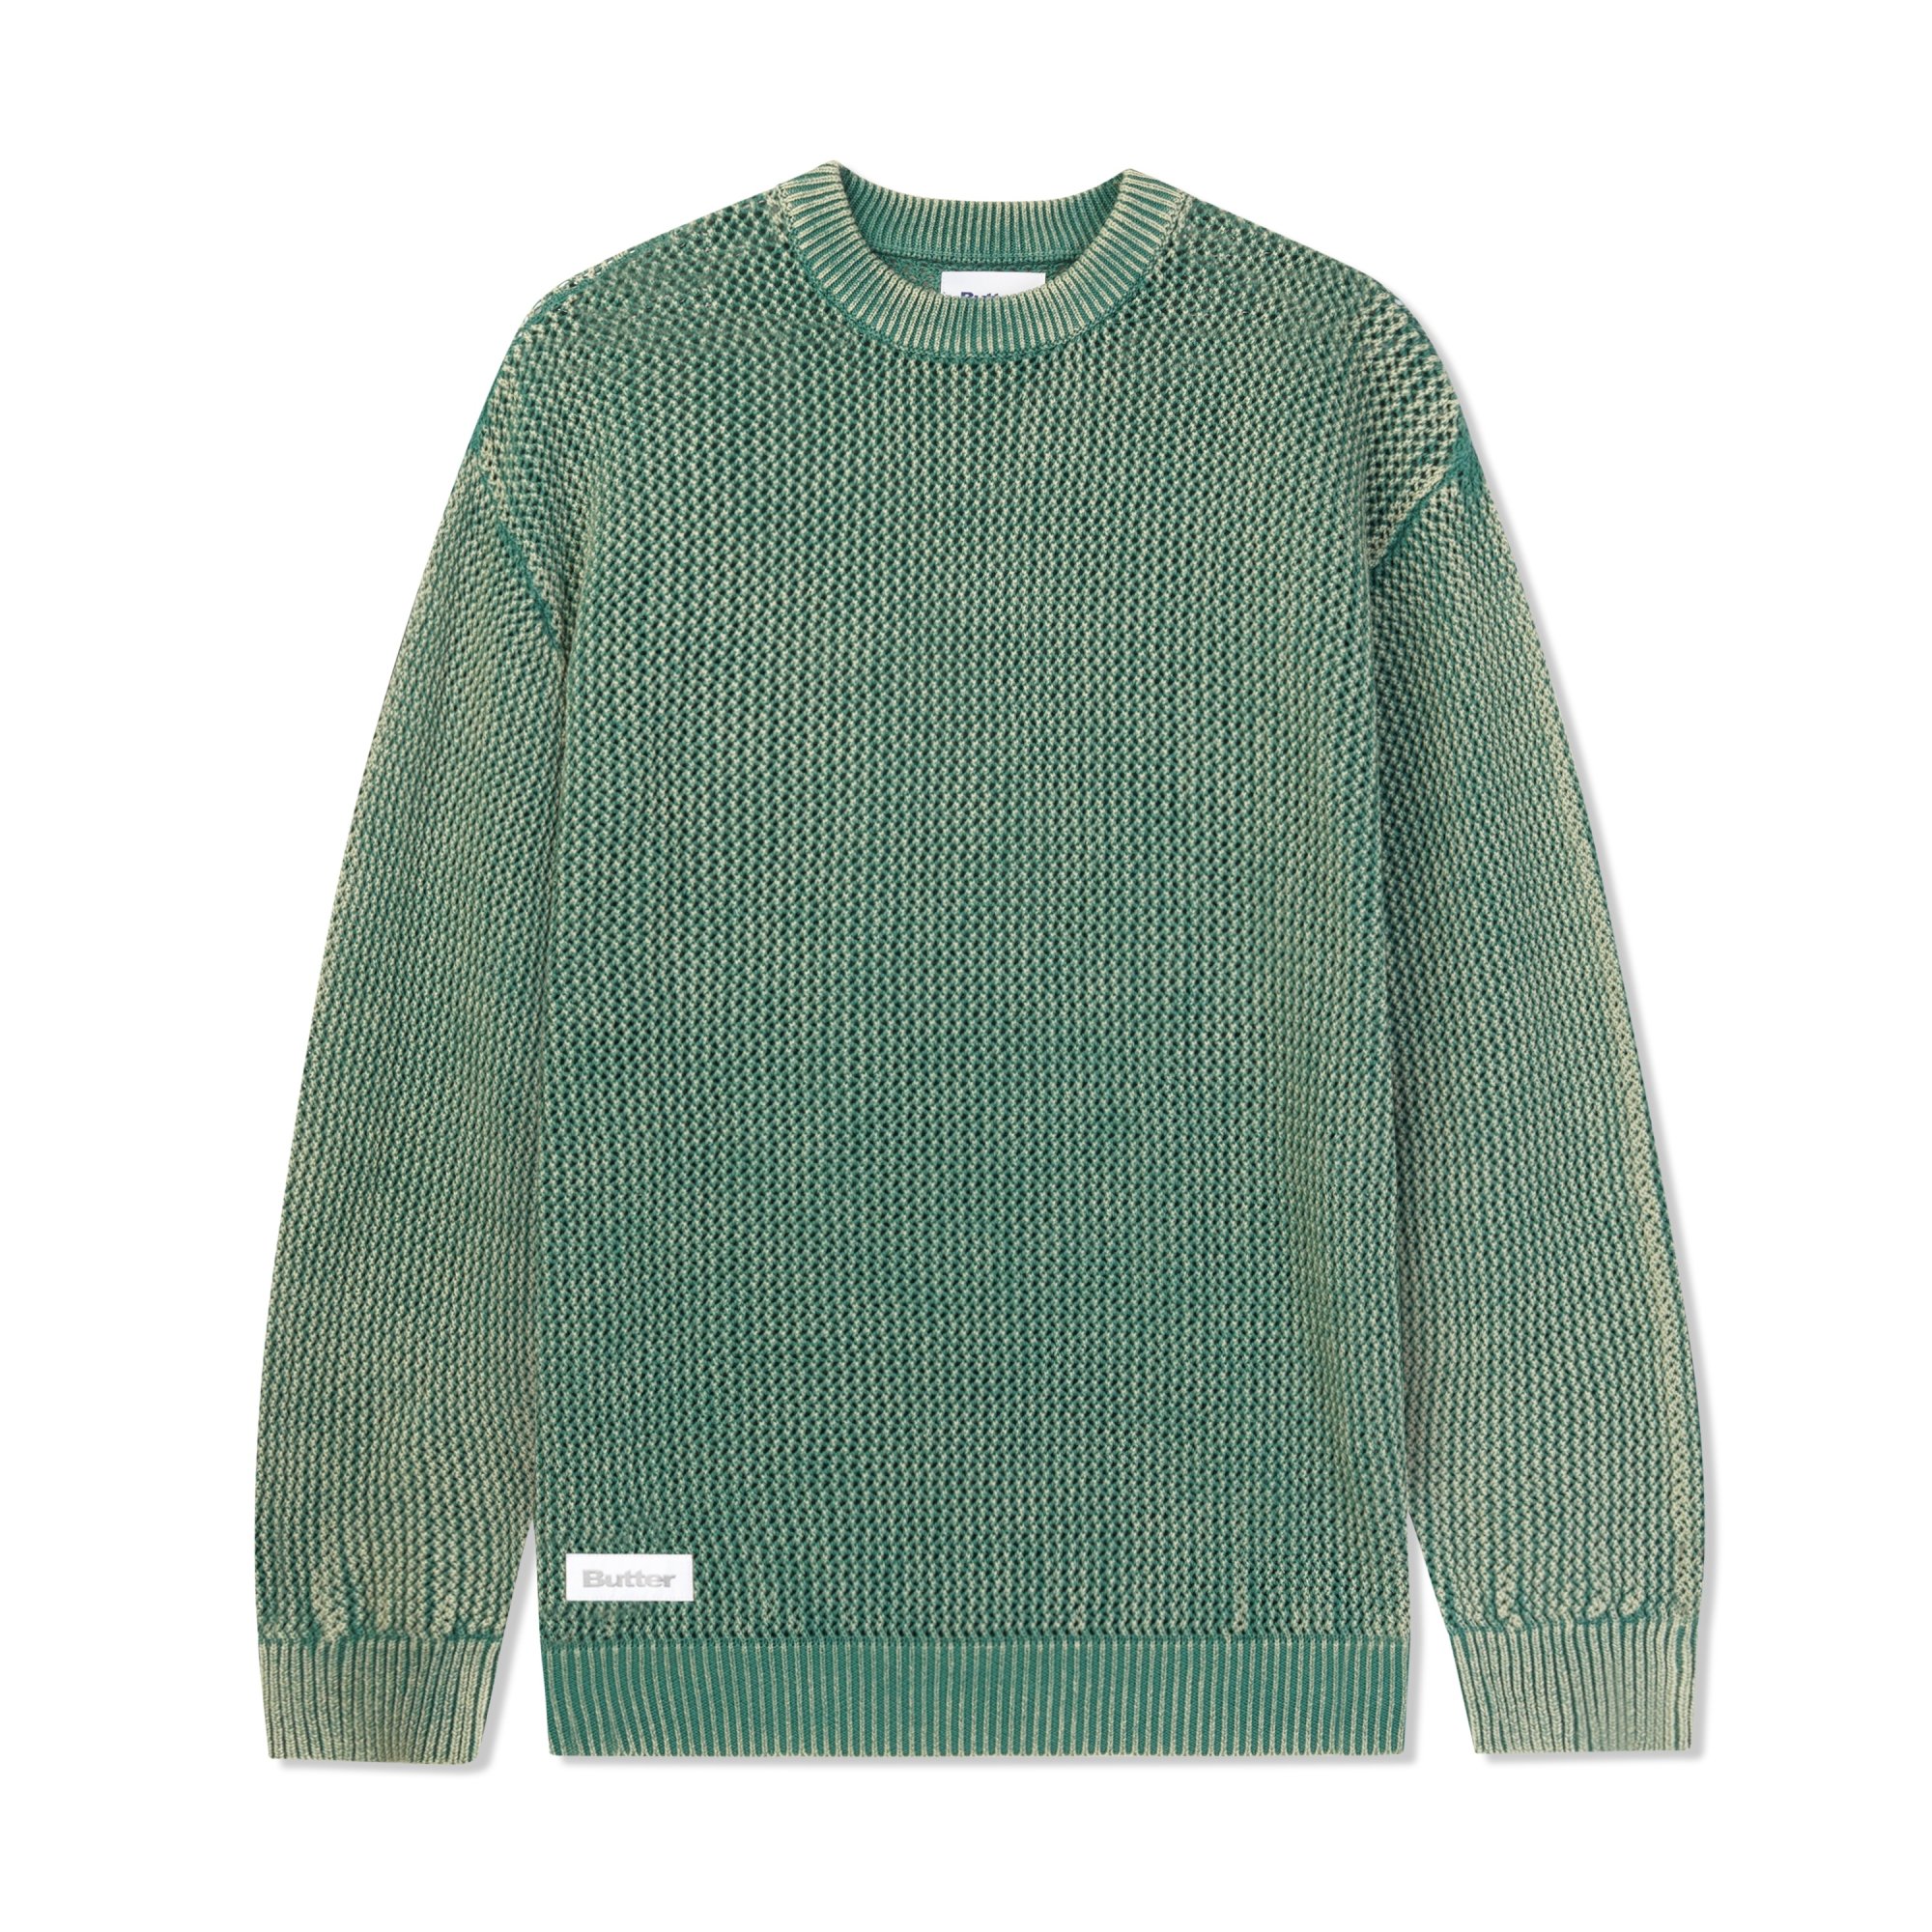 BUTTER GOODS<br>Washed Knitted Sweater<br>